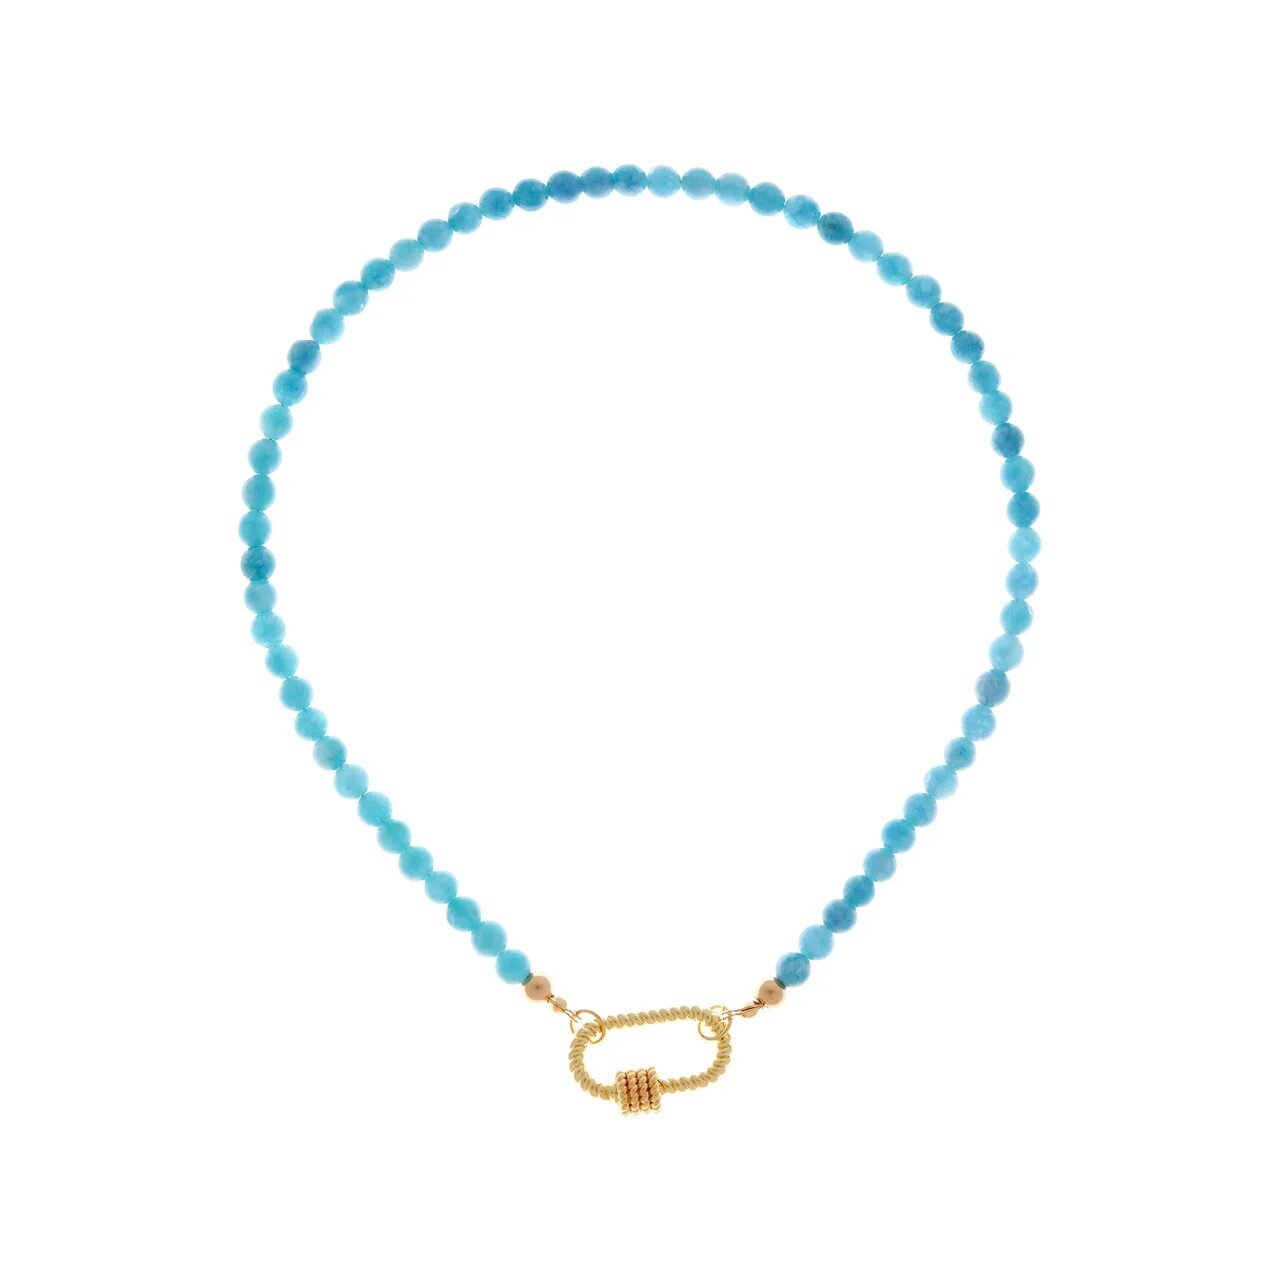 HOLLY JUNE Колье Carabiner Gold Turquoise Necklace колье holly june carabiner necklace turquoise 1 шт